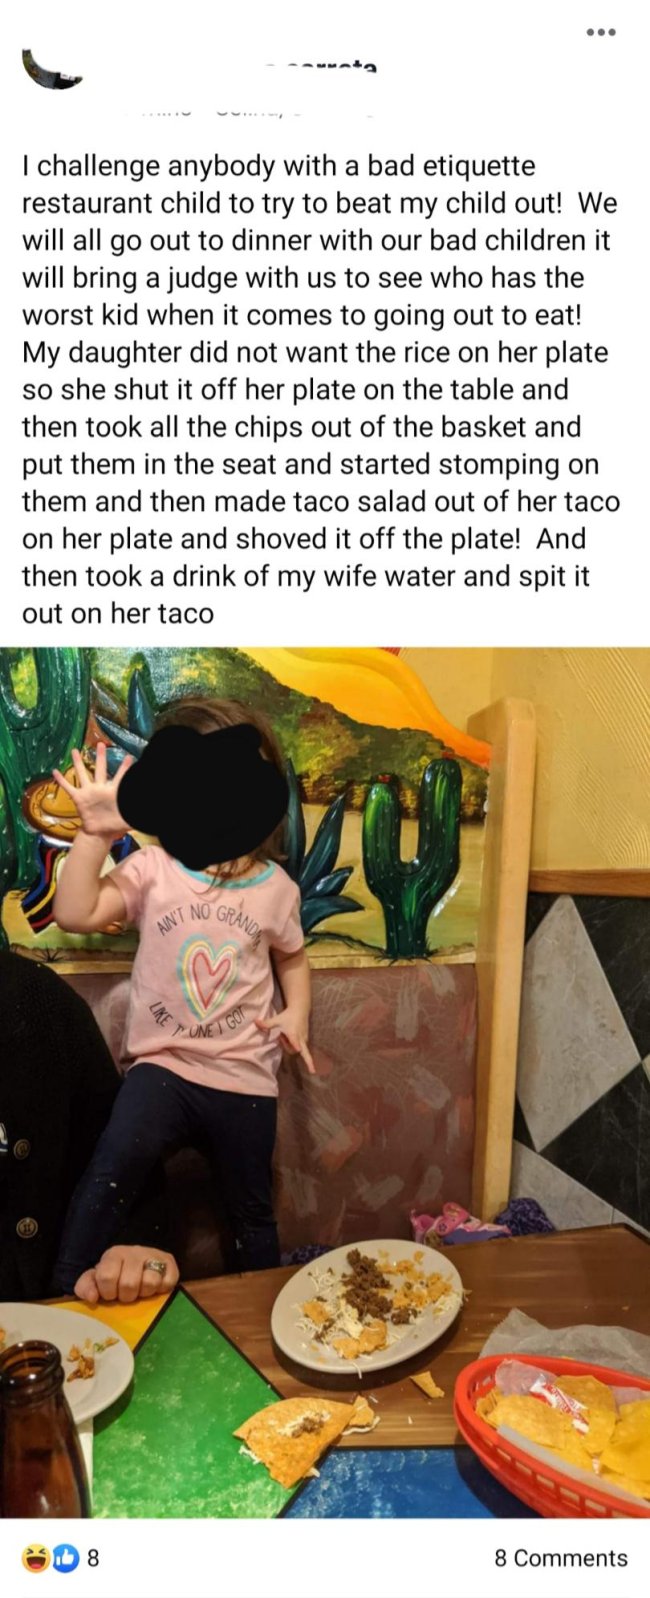 These people who really thought it was a cute idea to take their child to a restaurant so they could raise hell.